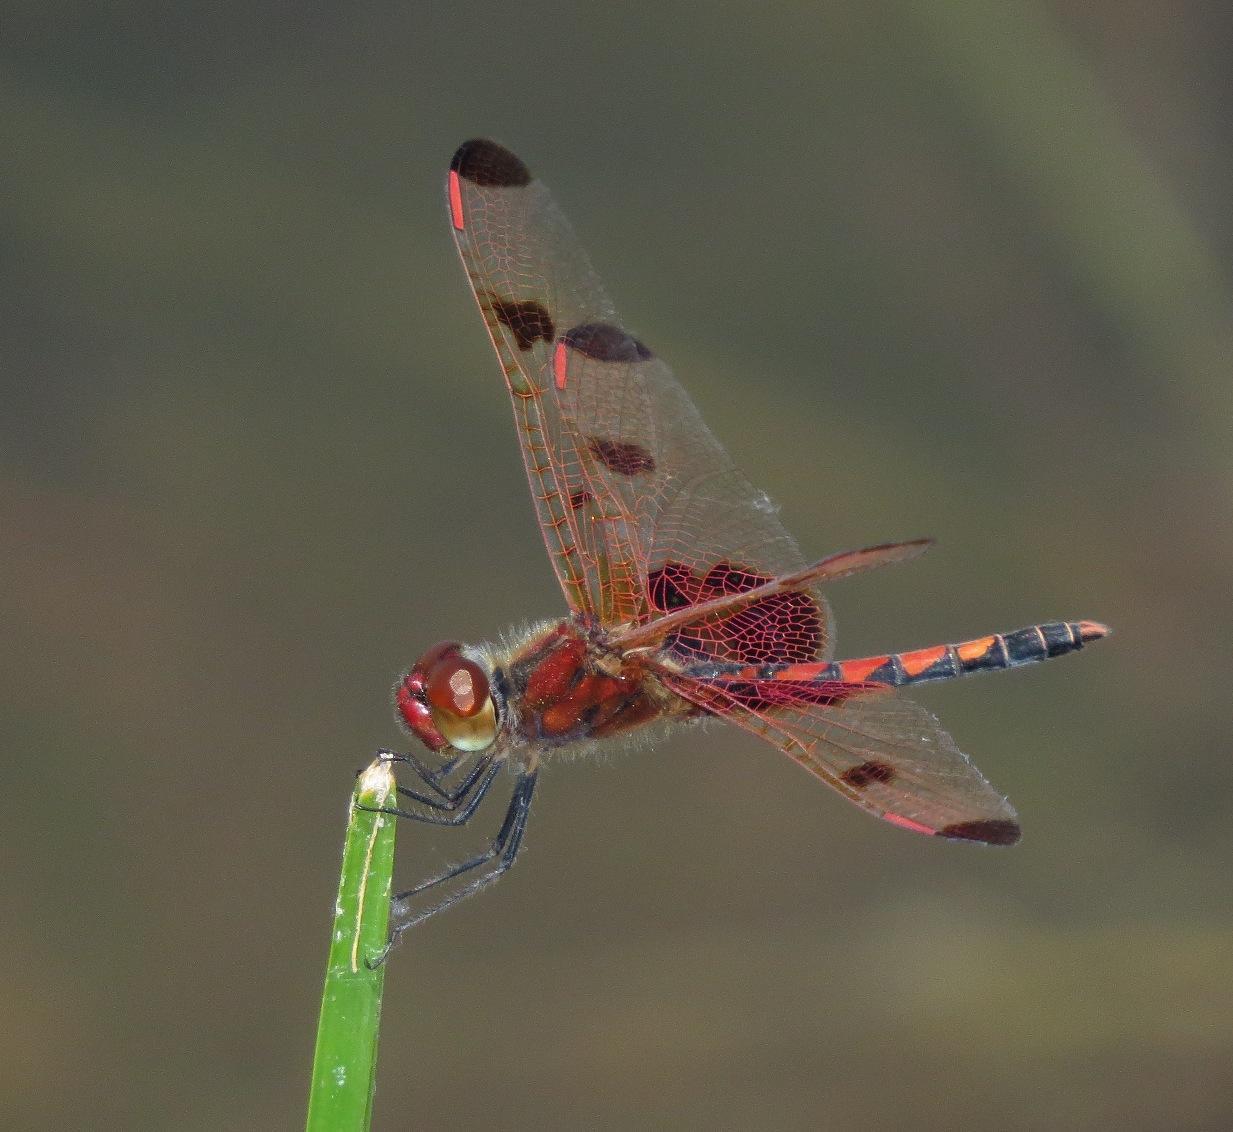 Calico Pennant Photo by Victor Fazio